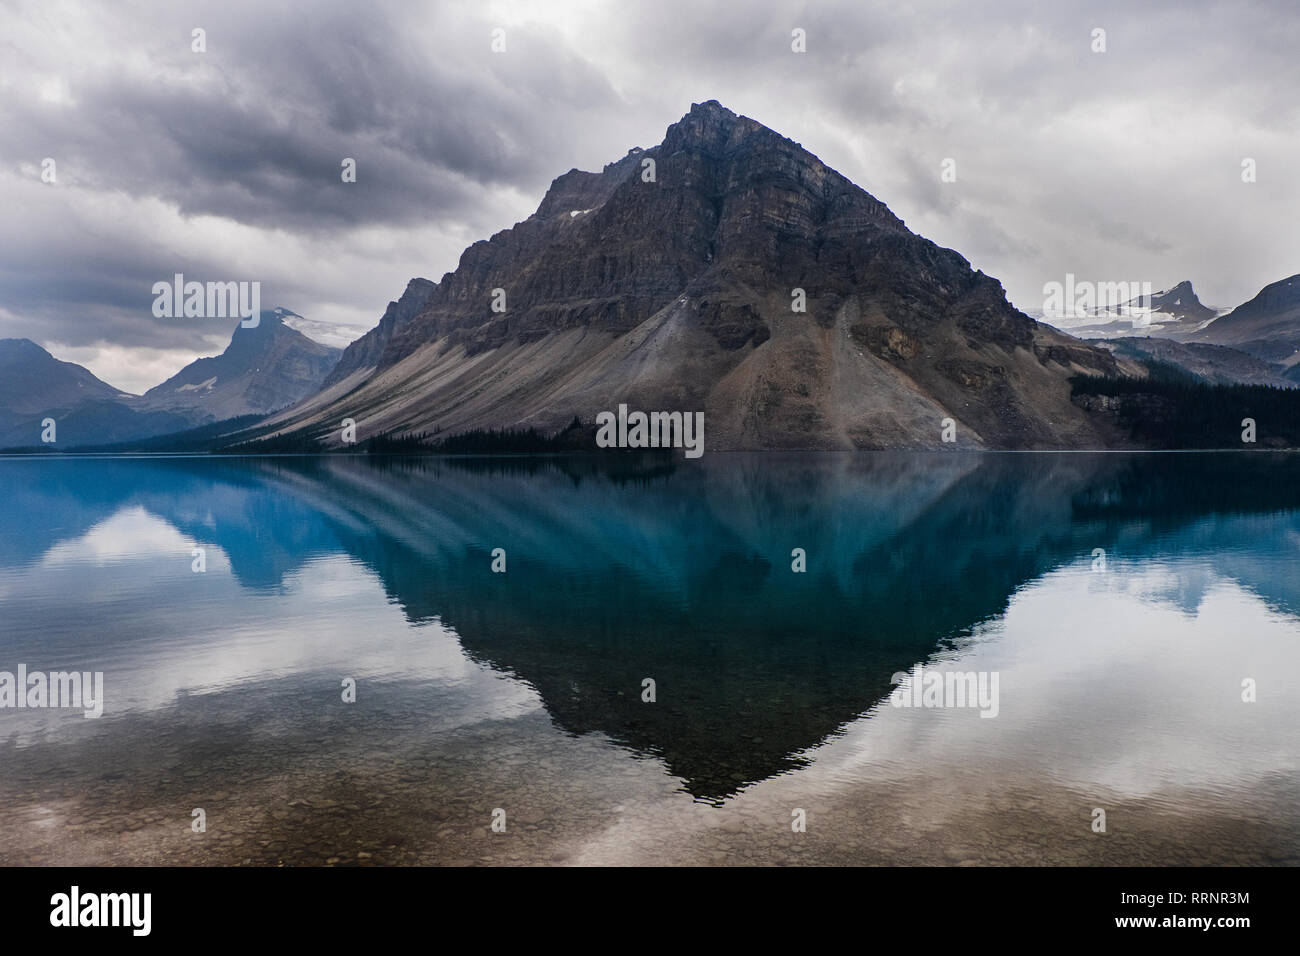 Tranquil view of craggy mountains and placid Bow Lake, Alberta, Canada Stock Photo